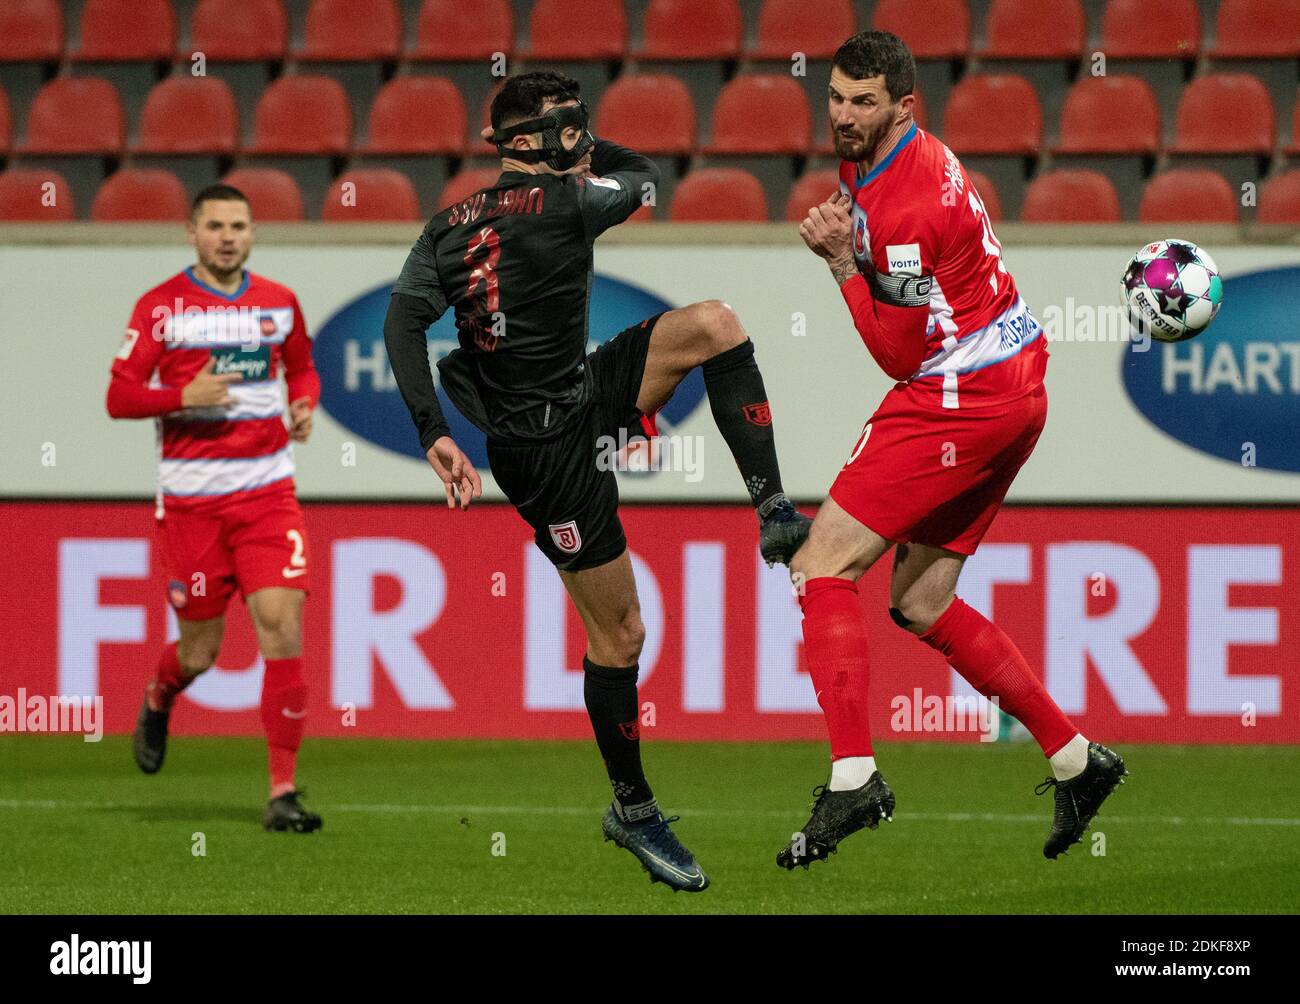 Heidenheim, Germany. 15th Dec, 2020. Football: 2. Bundesliga, 1. FC Heidenheim - Jahn Regensburg, Matchday 12 at Voith Arena. Heidenheim's Norman Theuerkauf (r) and Regensburg's Albion Vrenezi engage in a duel. Credit: Stefan Puchner/dpa - IMPORTANT NOTE: In accordance with the regulations of the DFL Deutsche Fußball Liga and/or the DFB Deutscher Fußball-Bund, it is prohibited to use or have used photographs taken in the stadium and/or of the match in the form of sequence pictures and/or video-like photo series./dpa/Alamy Live News Stock Photo